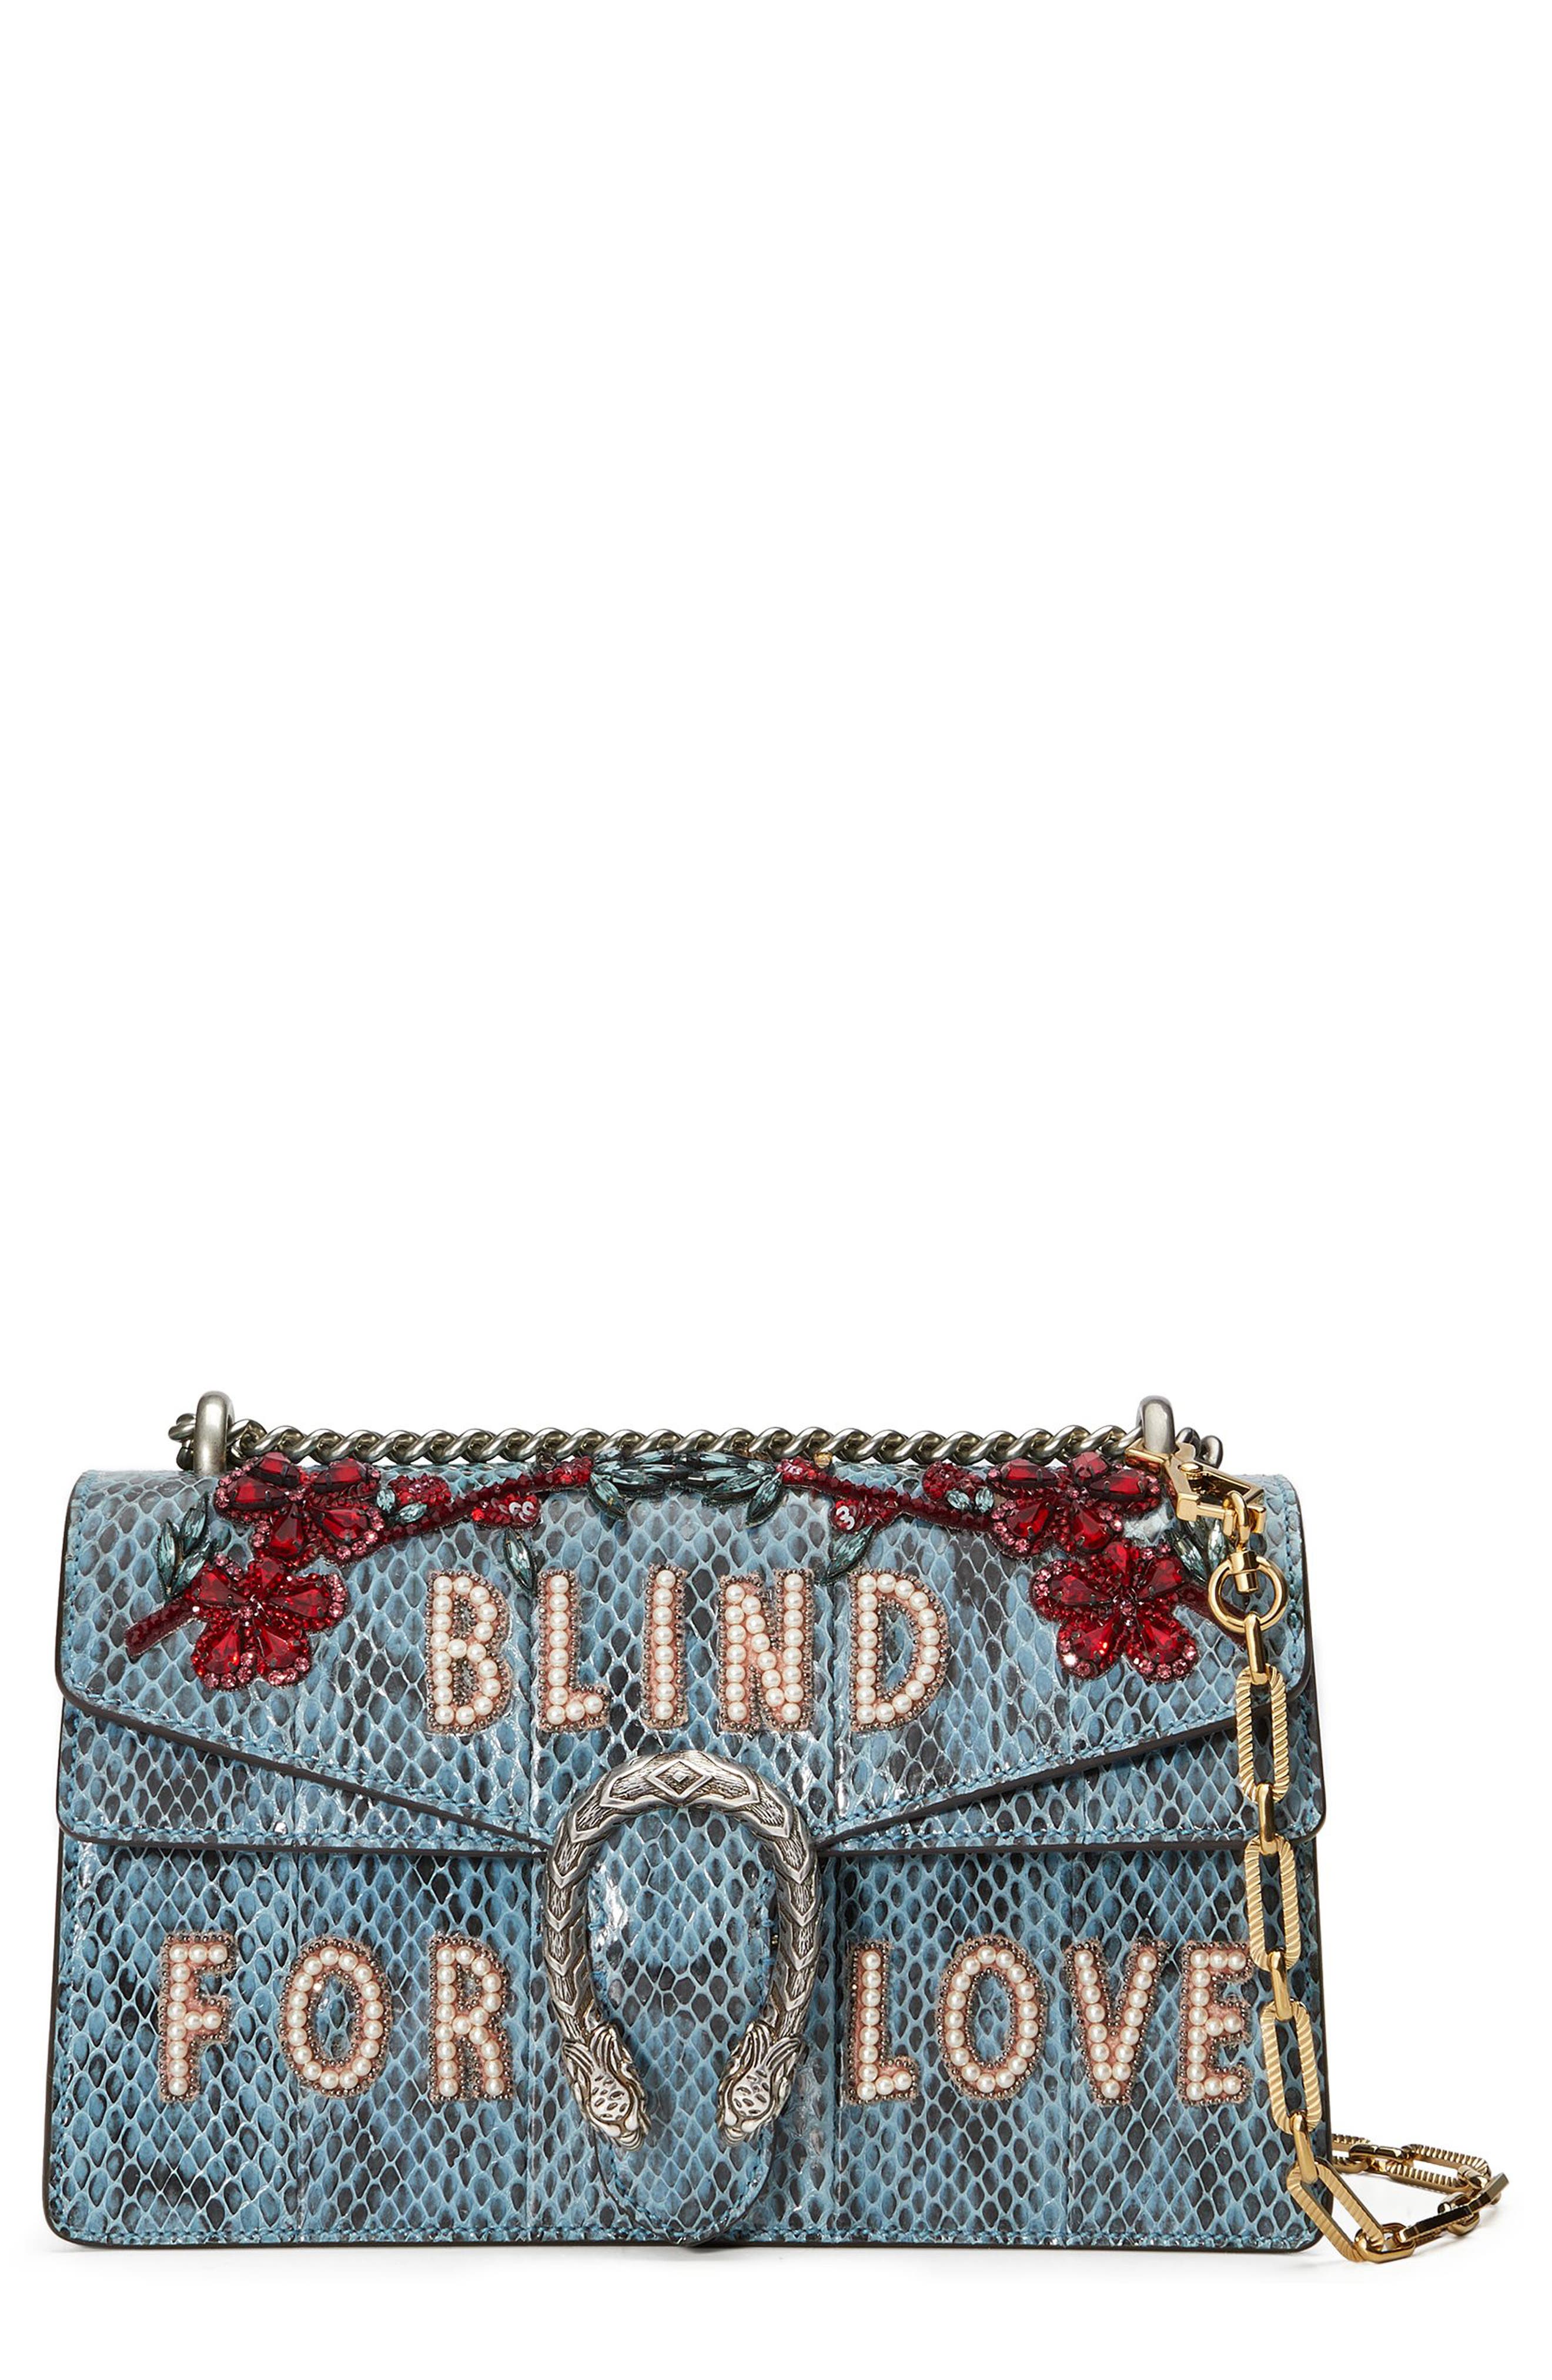 gucci purse blind for love